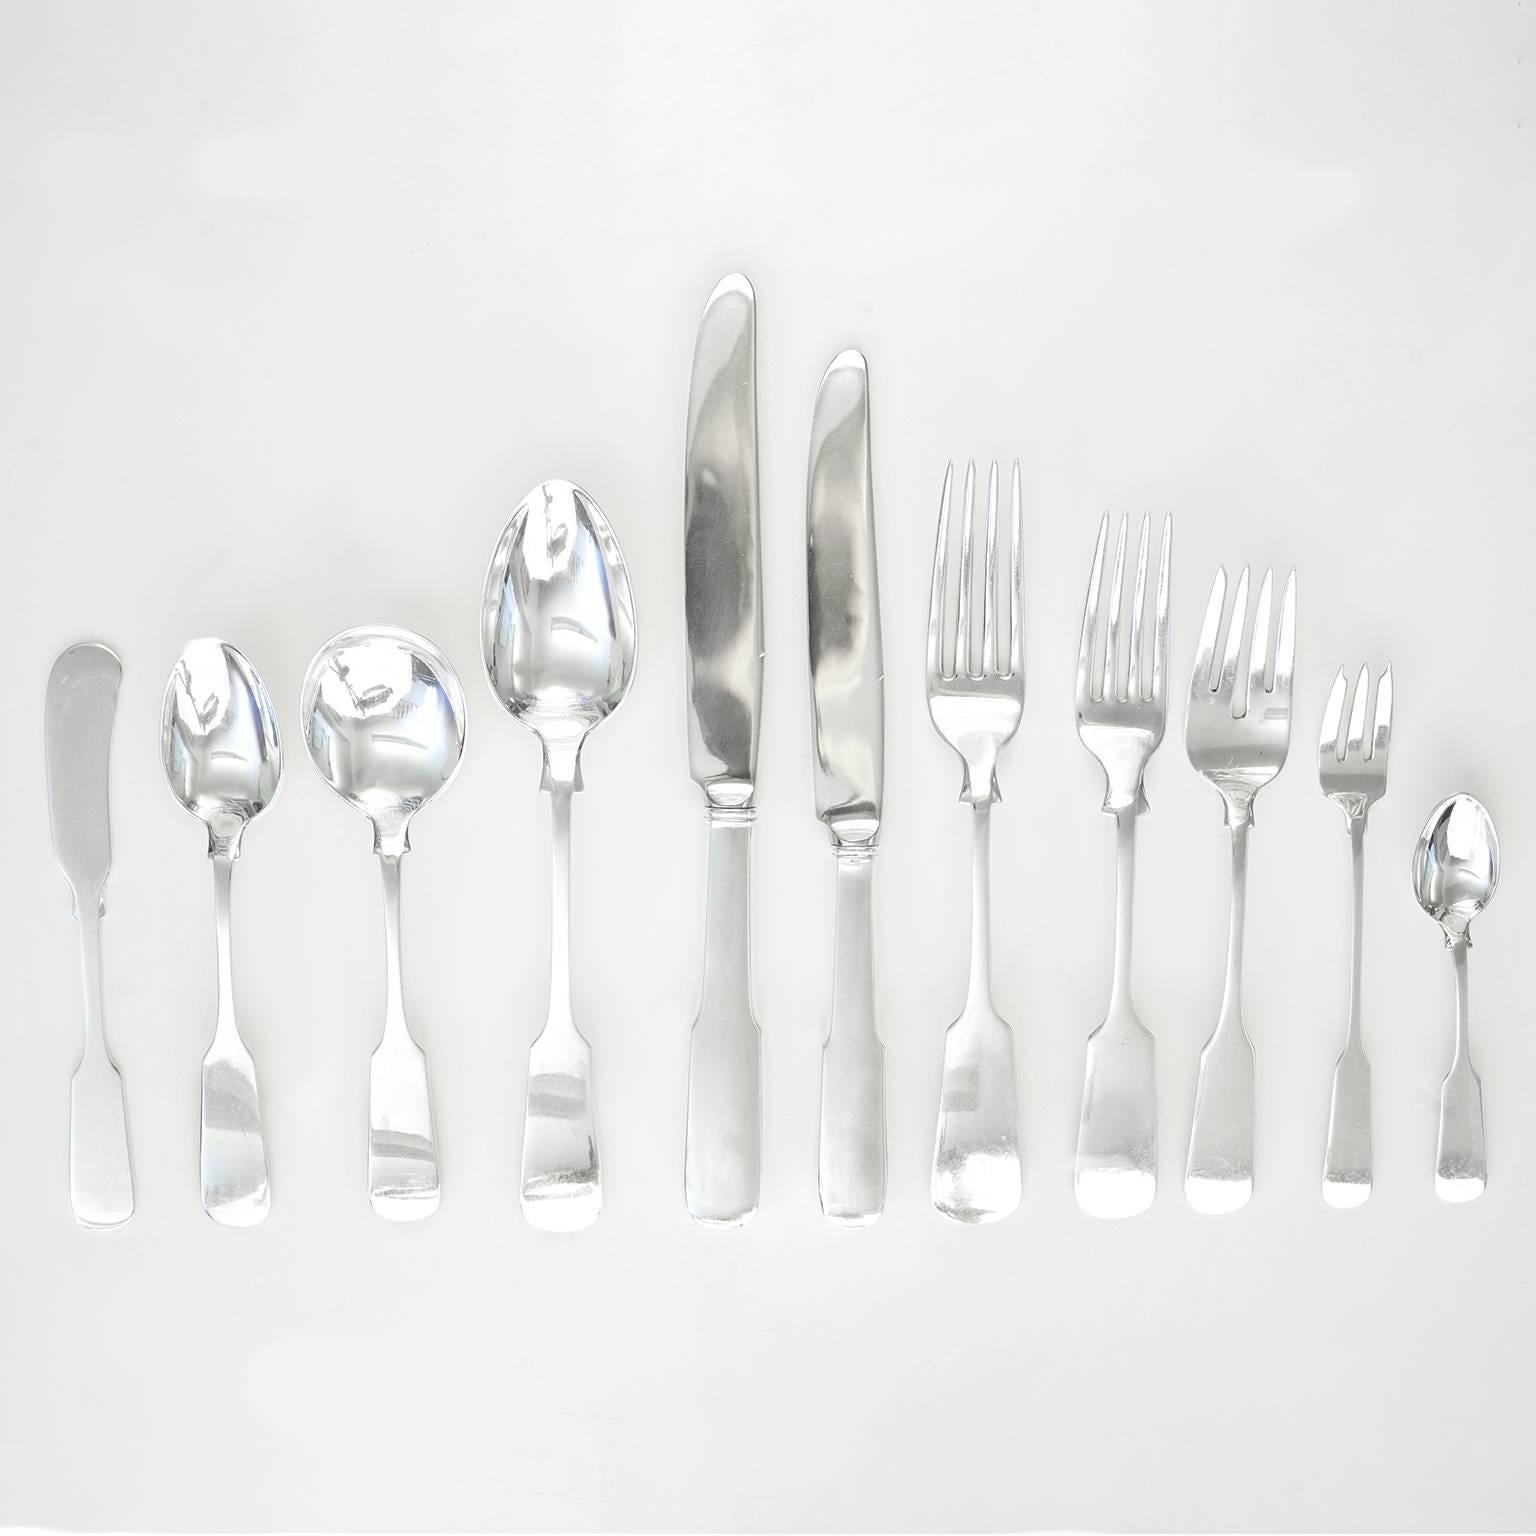 Circa 1950s, by Gorham, American. 131 piece set. This lovely sterling flatware service for 12 in a classic fiddle motif features the elegant architectural lines American colonial design was known for. Fiddle pattern has become a modern mainstay; the